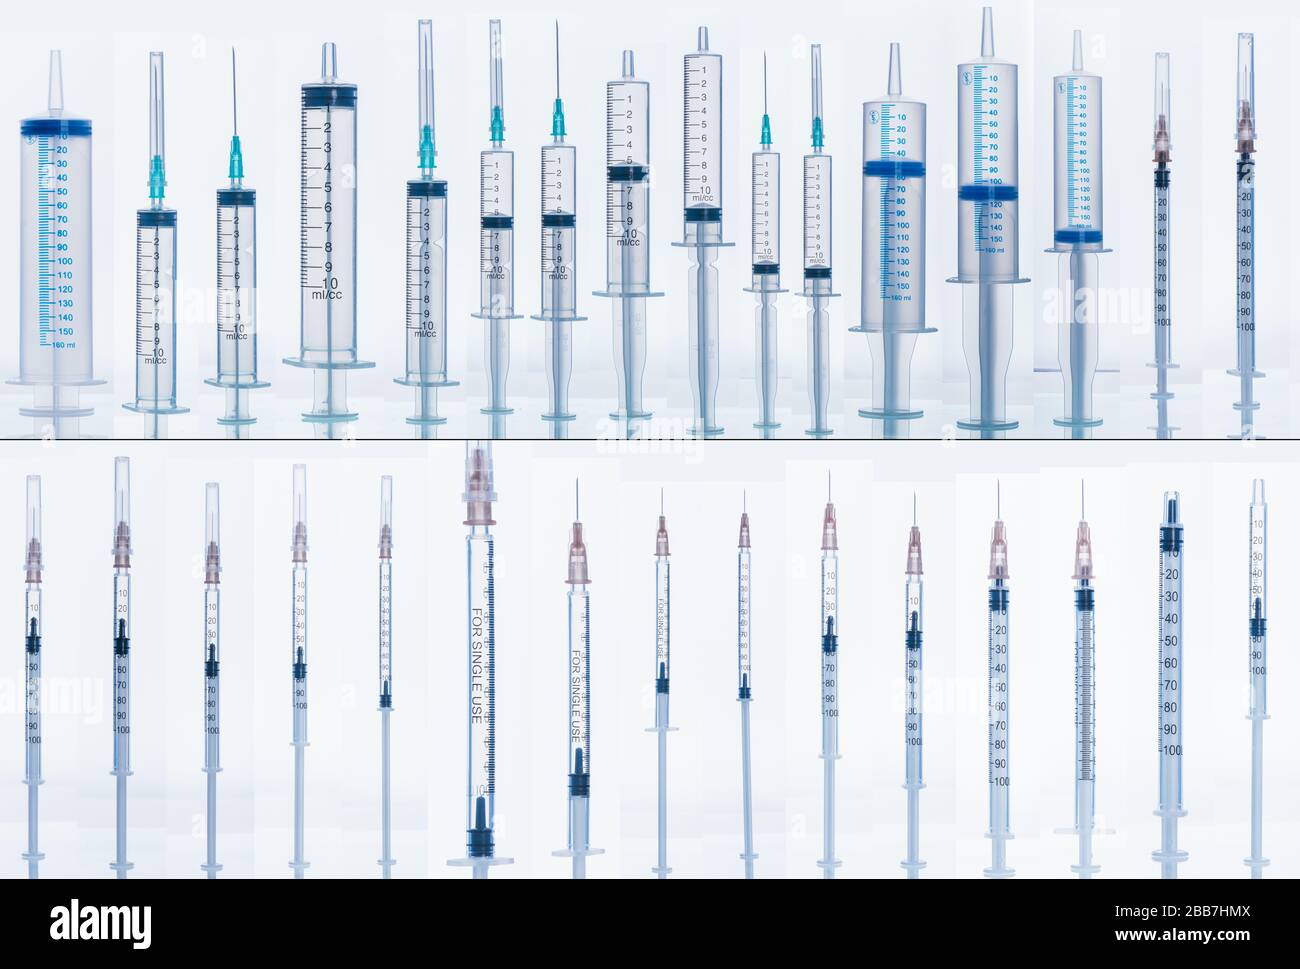 Medical Syringe with needle isolated on white, macro. Many different syringes in different positions with and without liquids. Stock Photo